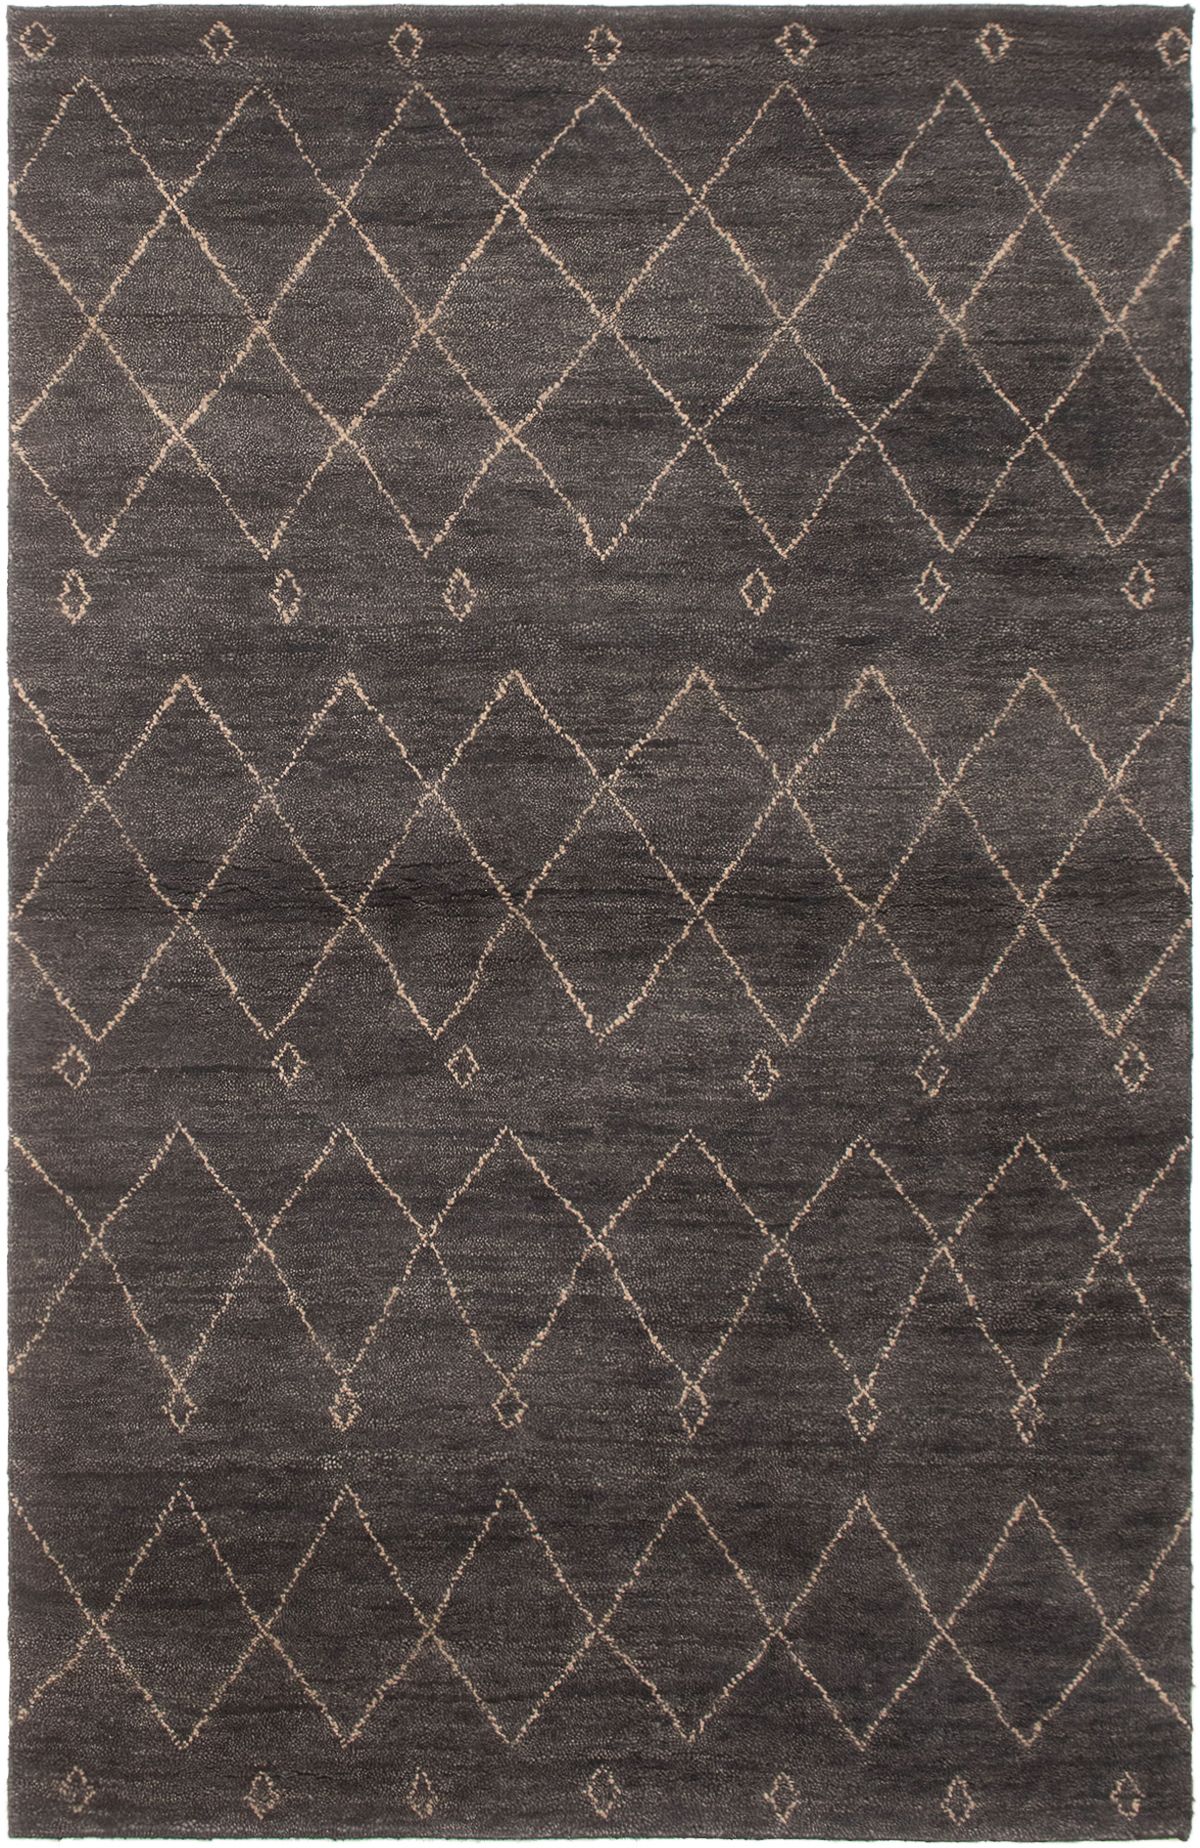 Hand-knotted Tangier Dark Navy Wool Rug 5'3" x 8'1" Size: 5'3" x 8'1"  